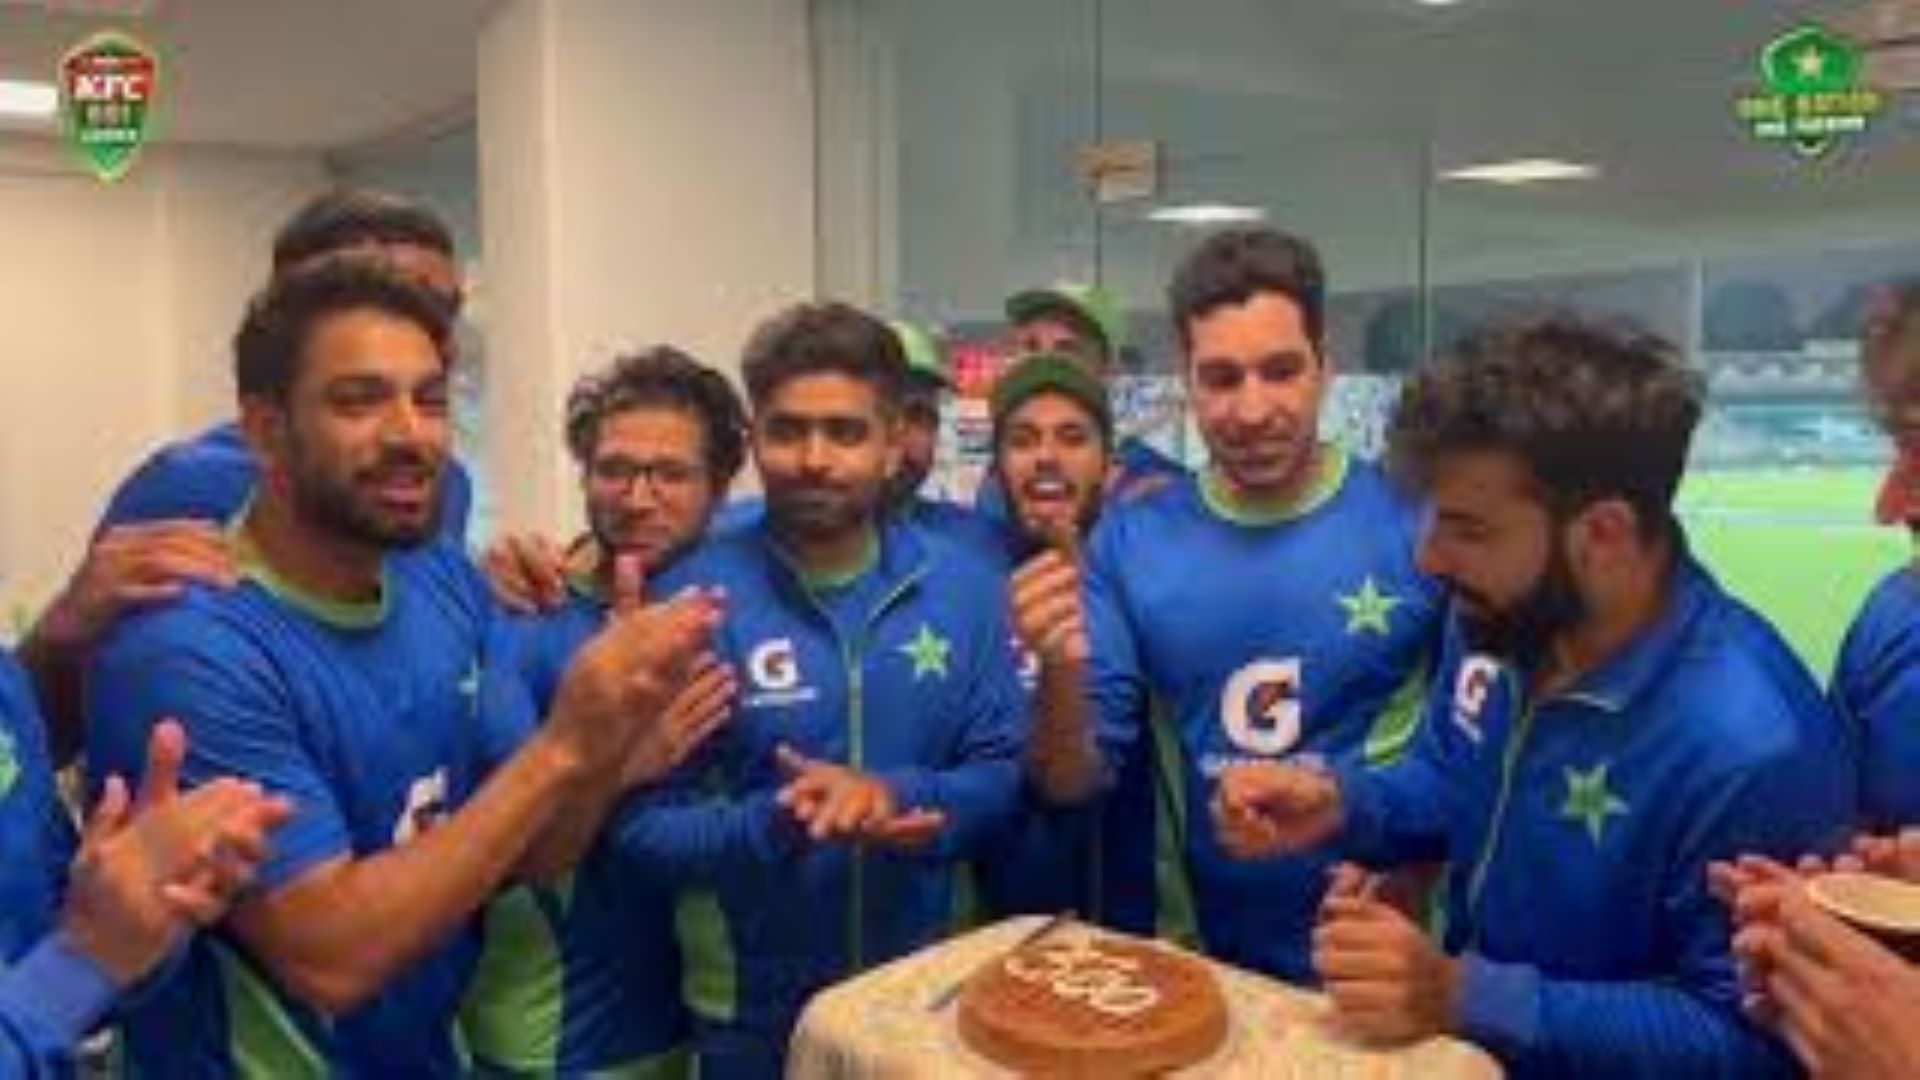 Pakistan beat New Zealand in the first ODI to achieve the 500th win milestone